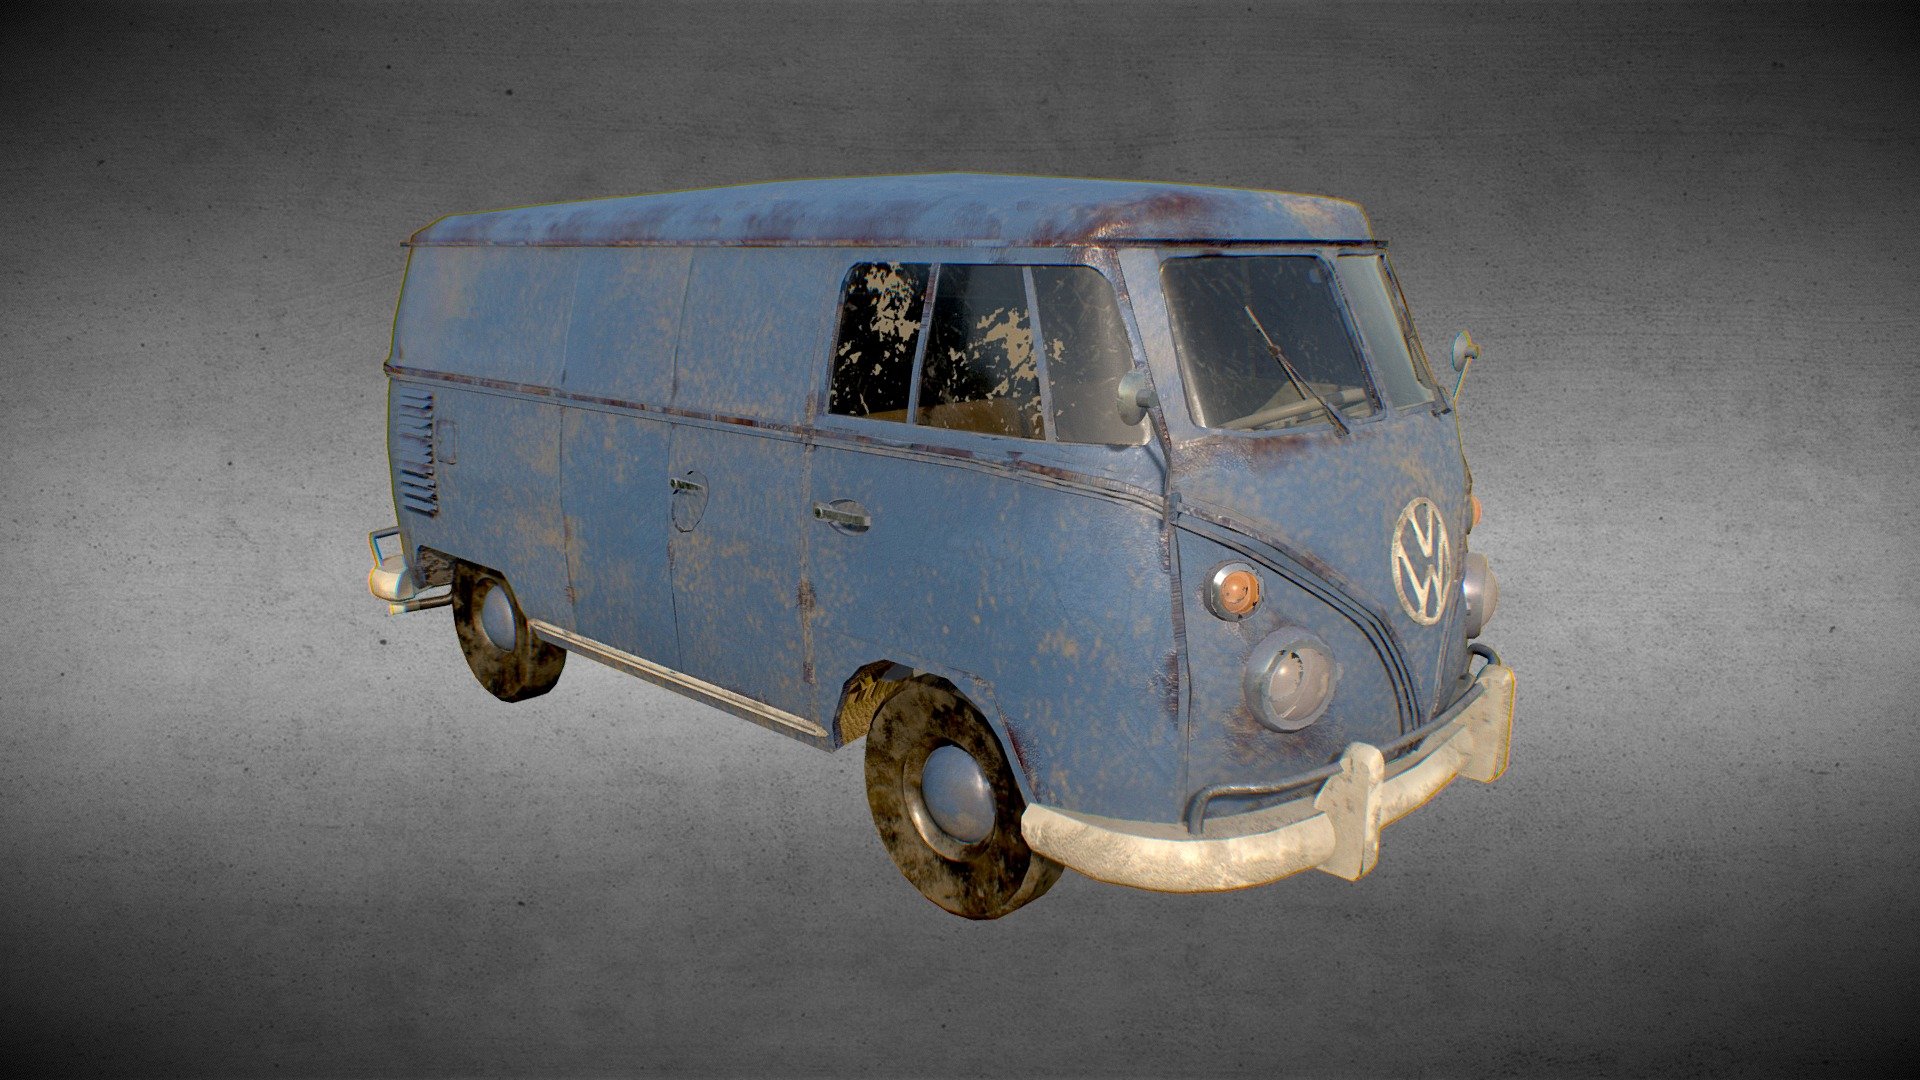 Volkswagen T1 in the form of an old commercial truck.
The model has many small details.
The texture has a 4k quality.

P.S. This is my first car model, I hope you will appreciate my efforts))

Artstation - Volkswagen T1 (old truck) - Download Free 3D model by pinkycolada 3d model